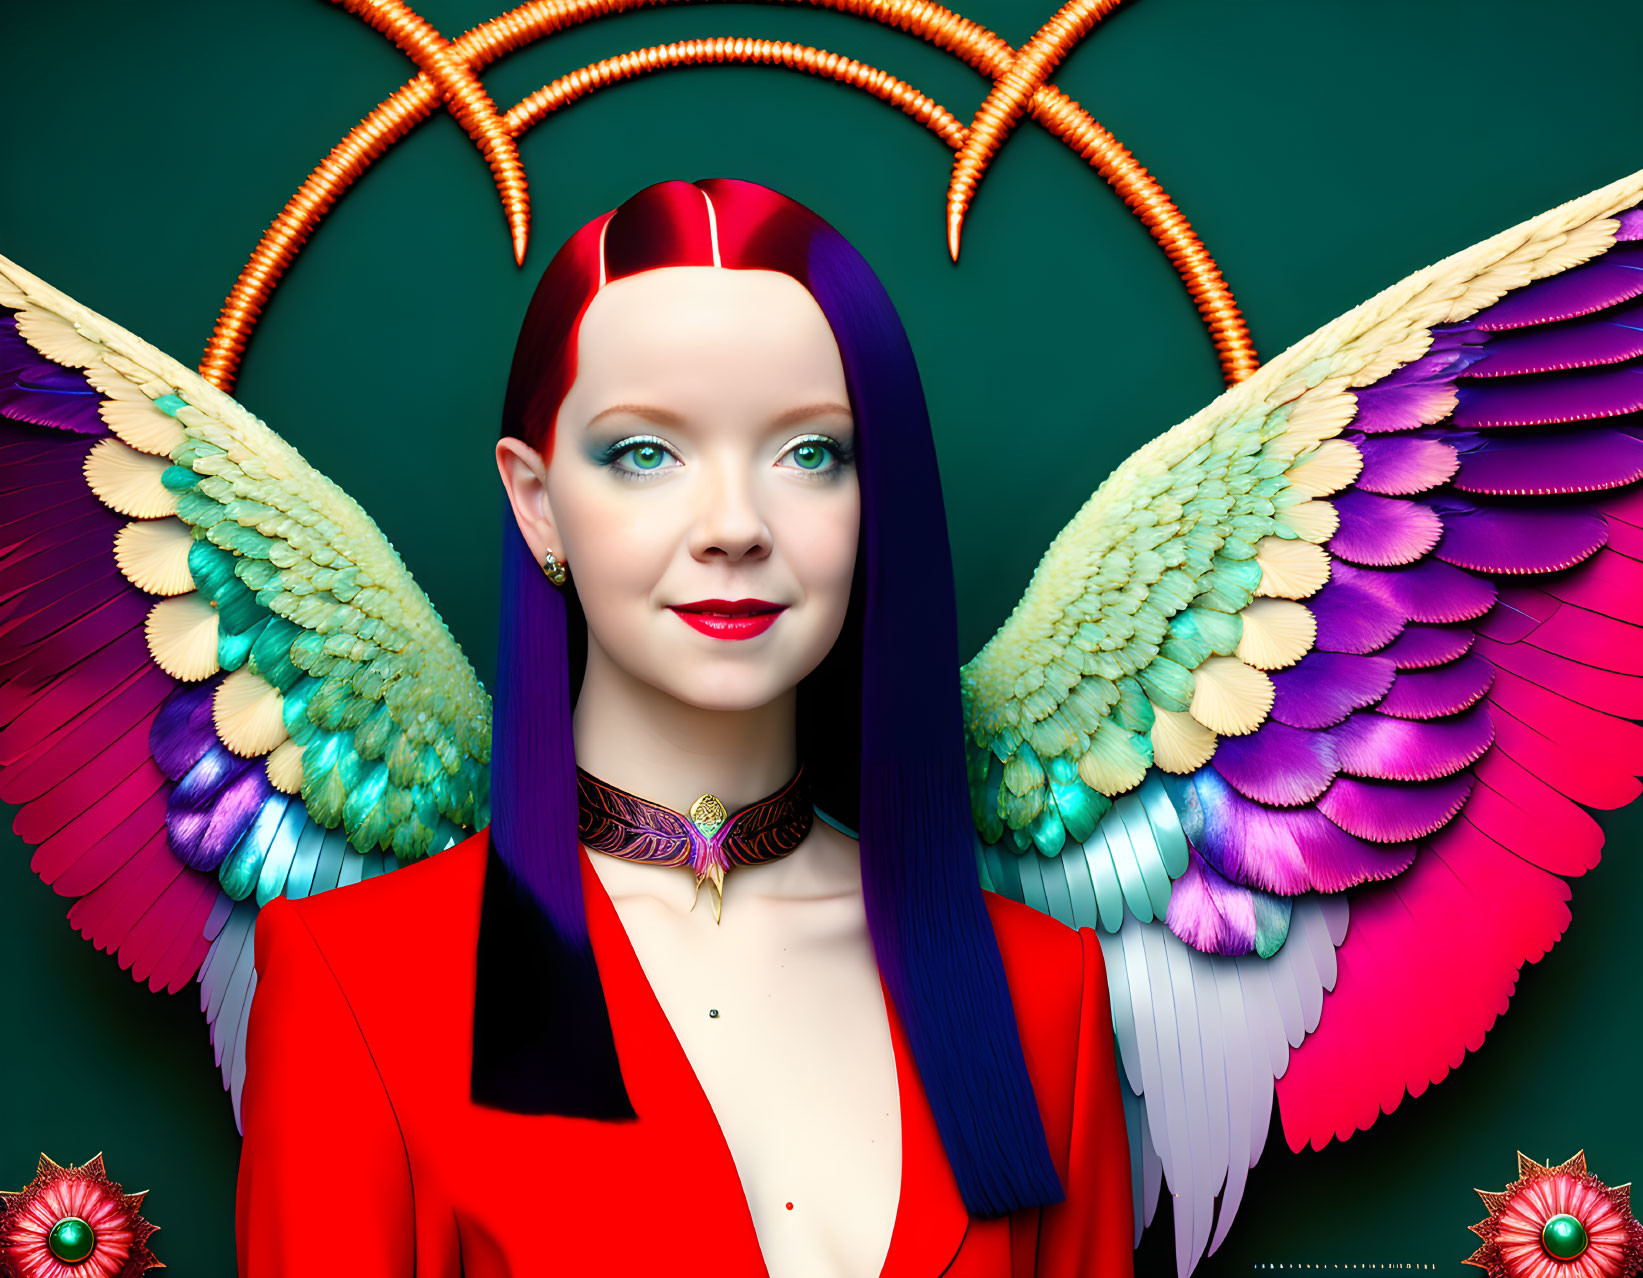 Colorful surreal portrait of a woman with multicolored wings and unique hairstyle on green backdrop.